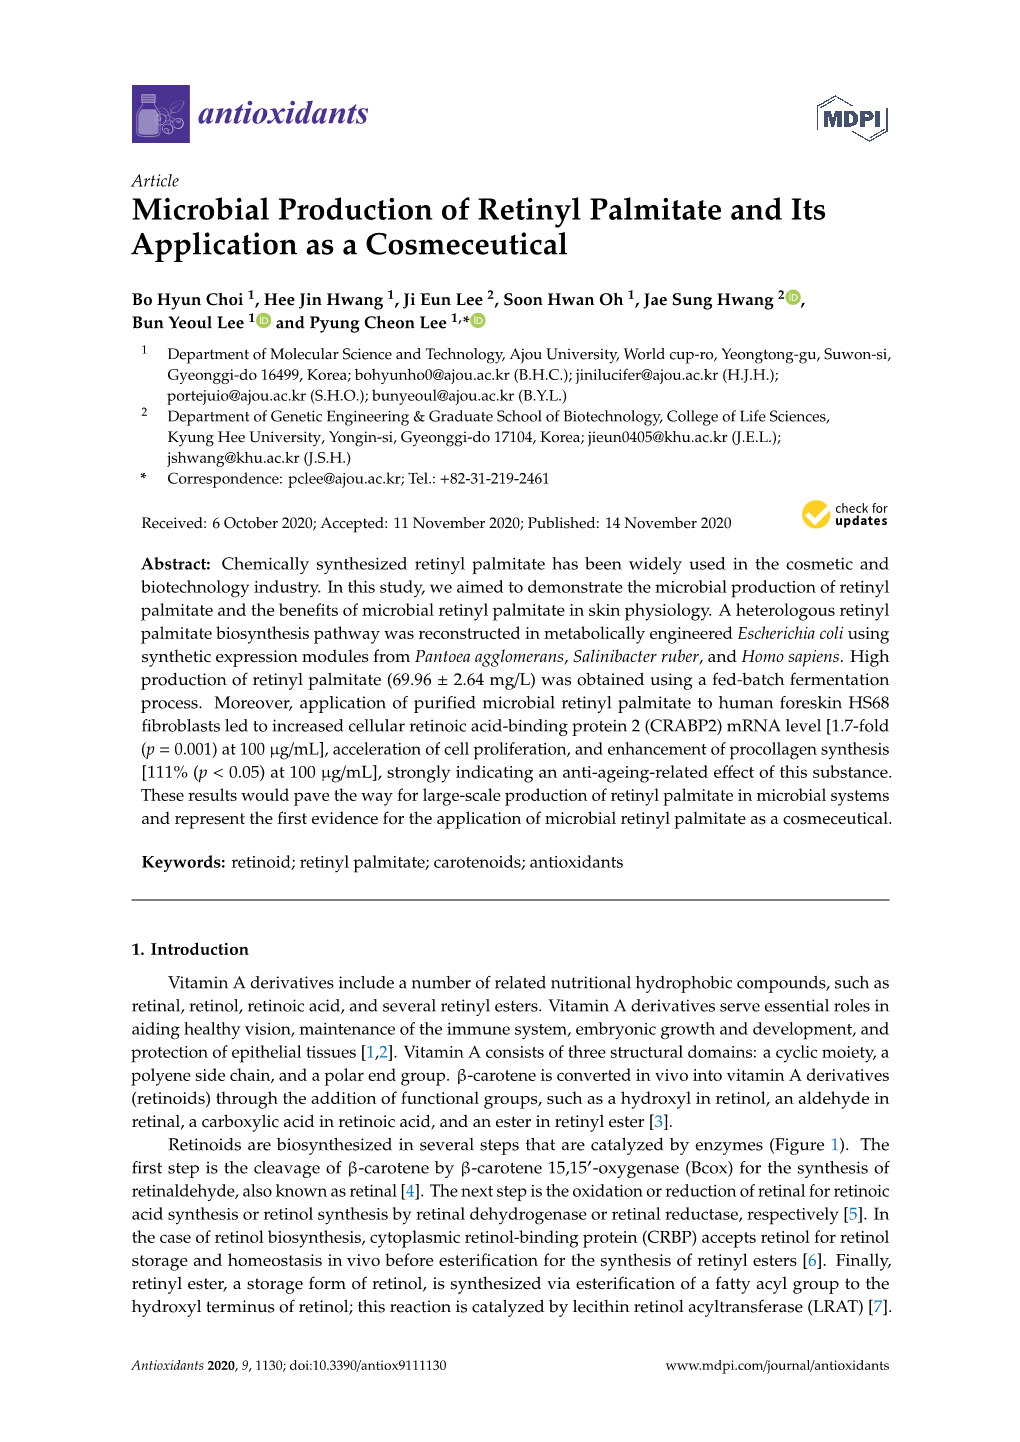 Microbial Production of Retinyl Palmitate and Its Application As a Cosmeceutical